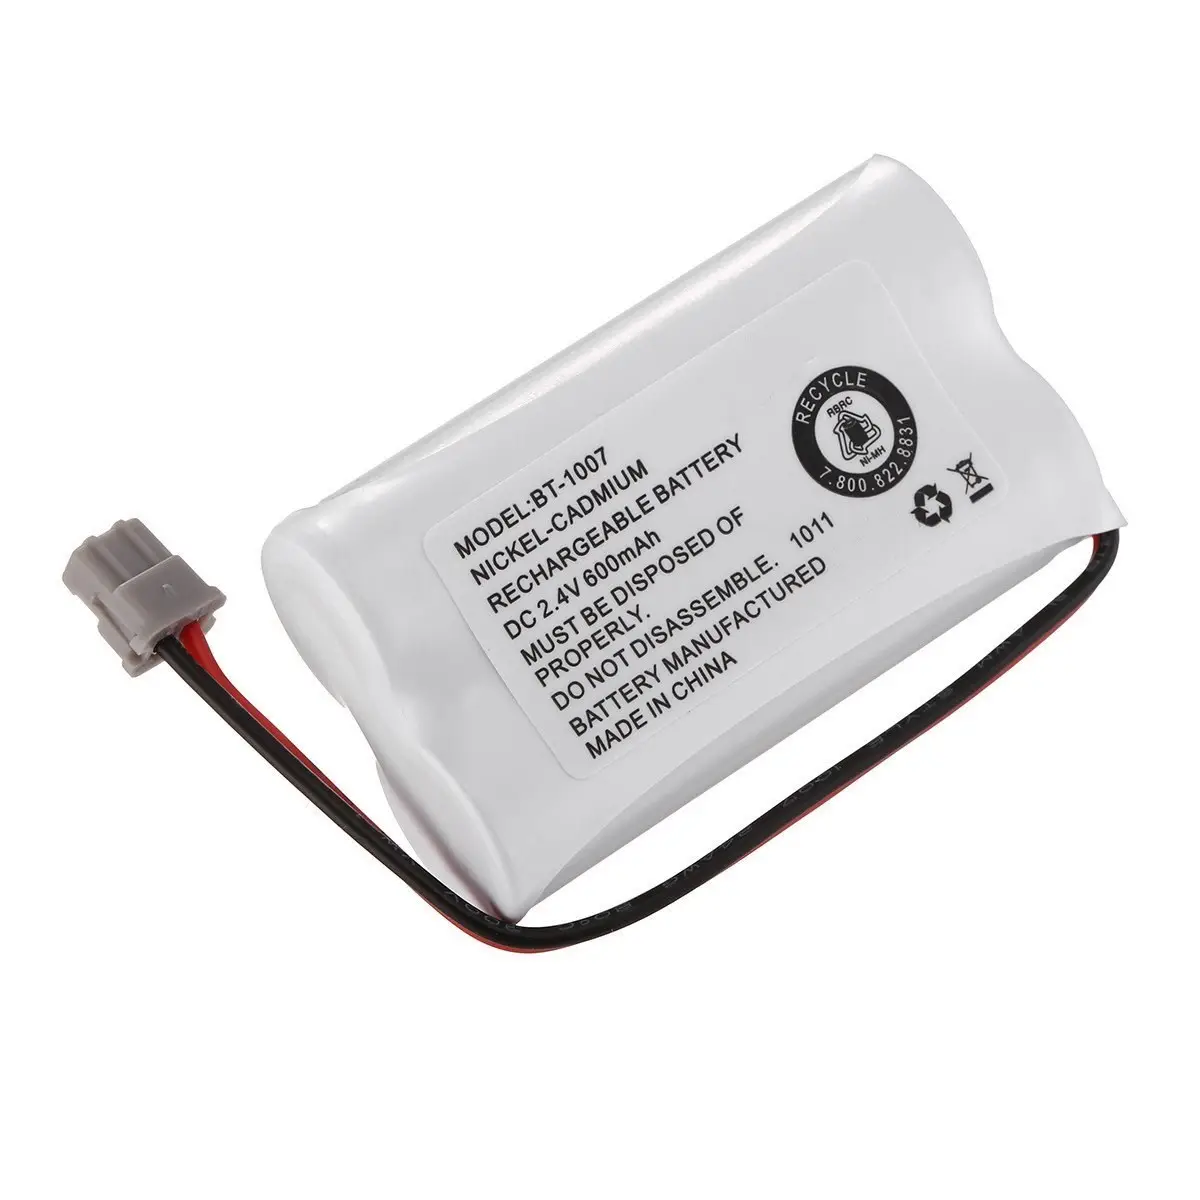 Cordless Phone Battery 2.4V 600mAh NICD Rechargeable Battery Pack For Uniden BT-1007 BP904